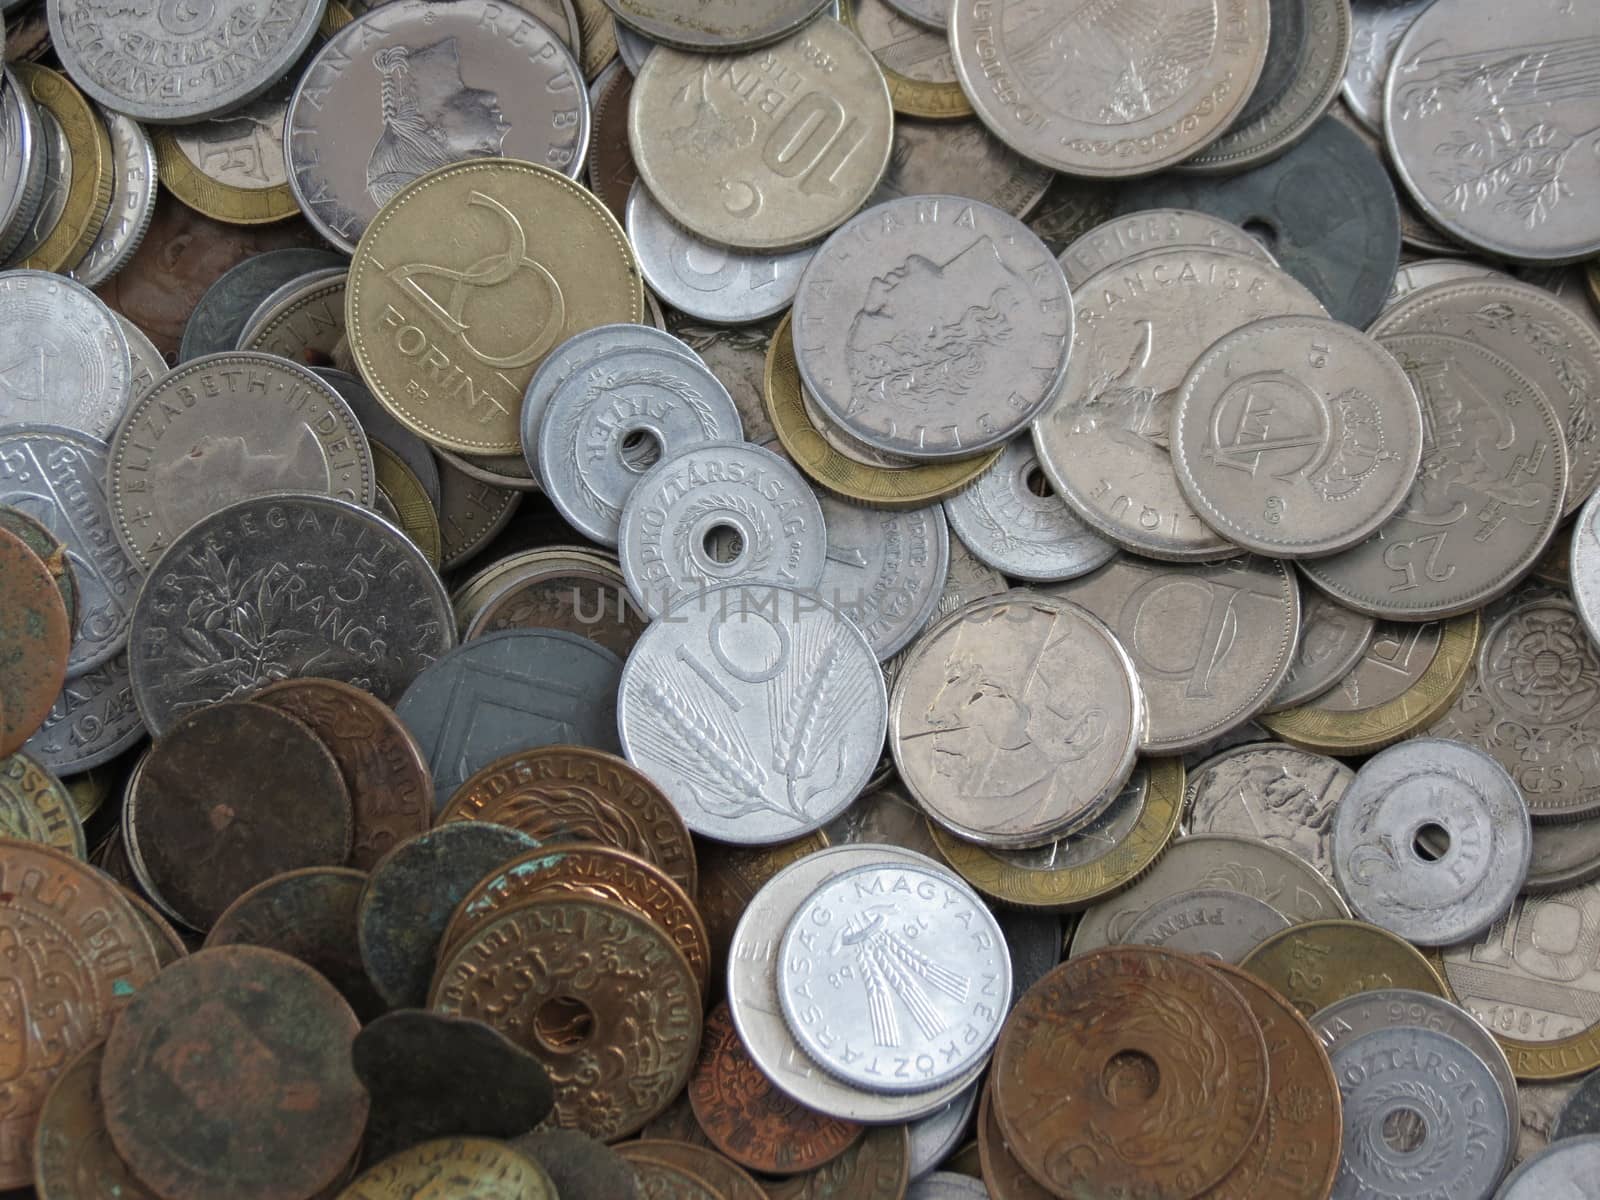 miscellaneous coins by paolo77